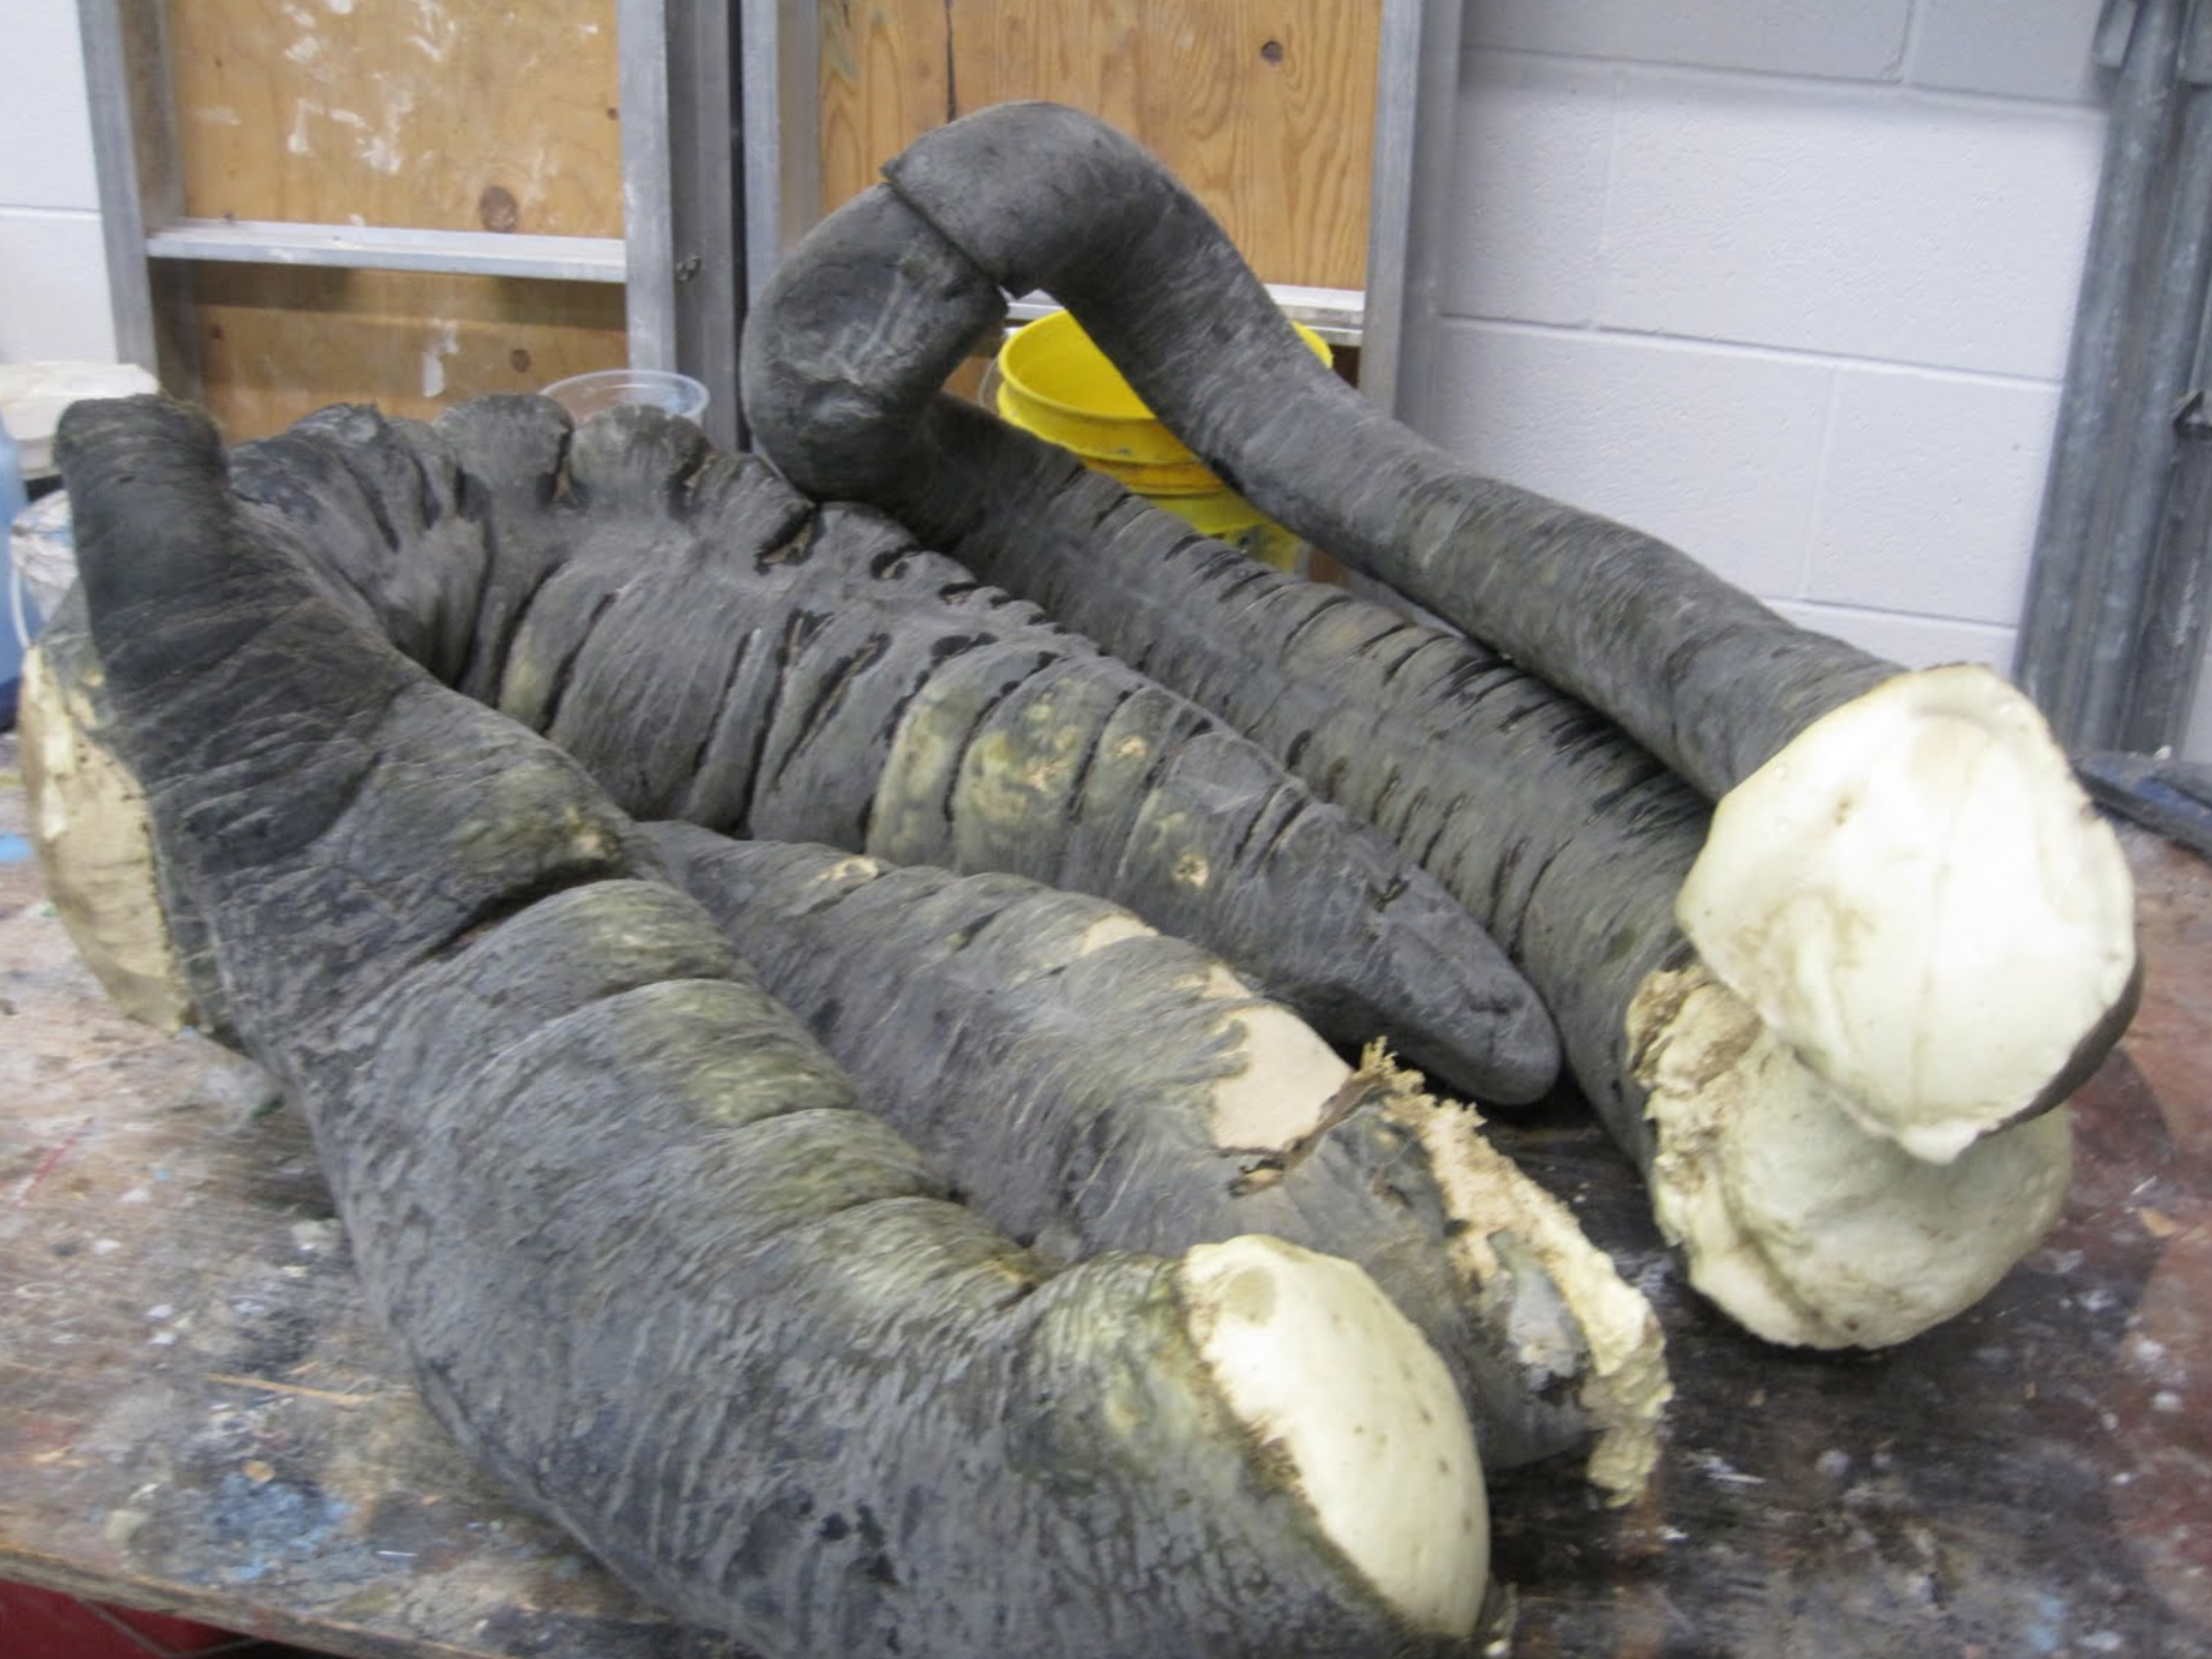  The cores of the equine colon with the biological materials removed. These will have any flaws repaired and be used in the next stage of creating an equine colic simulator. Various materials will be tested in order to achieve a realistic feel and du